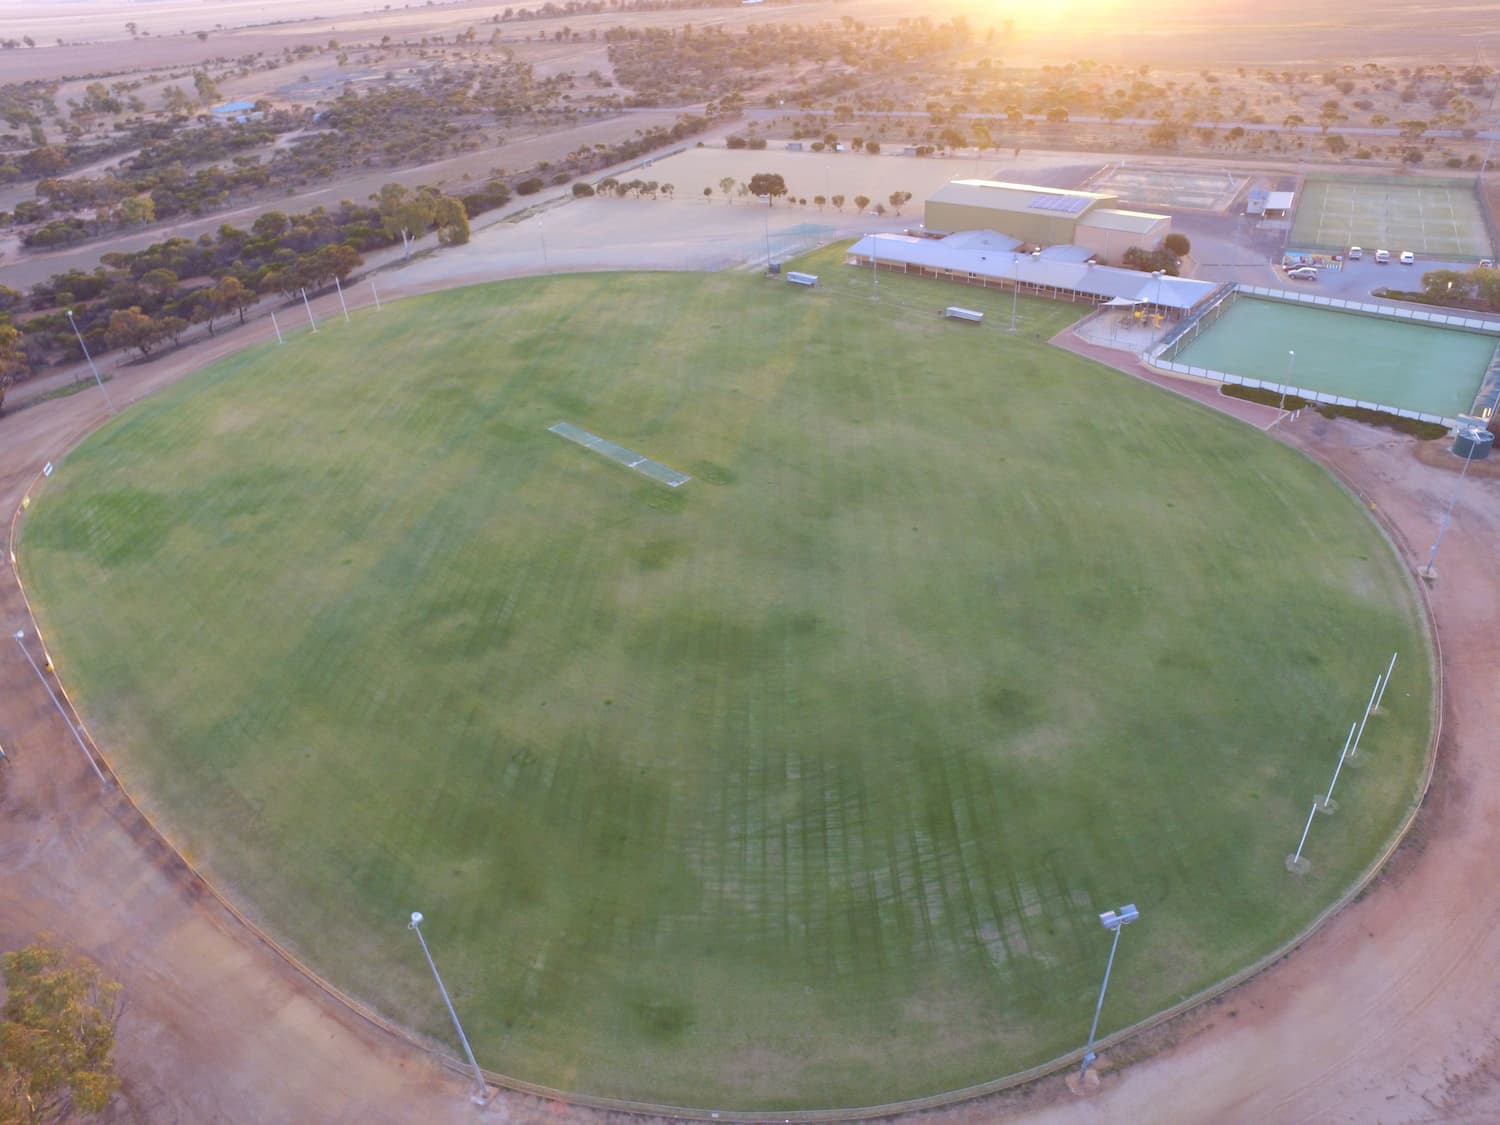 image taken from the sky of the mukinbudin football oval and recreation grounds